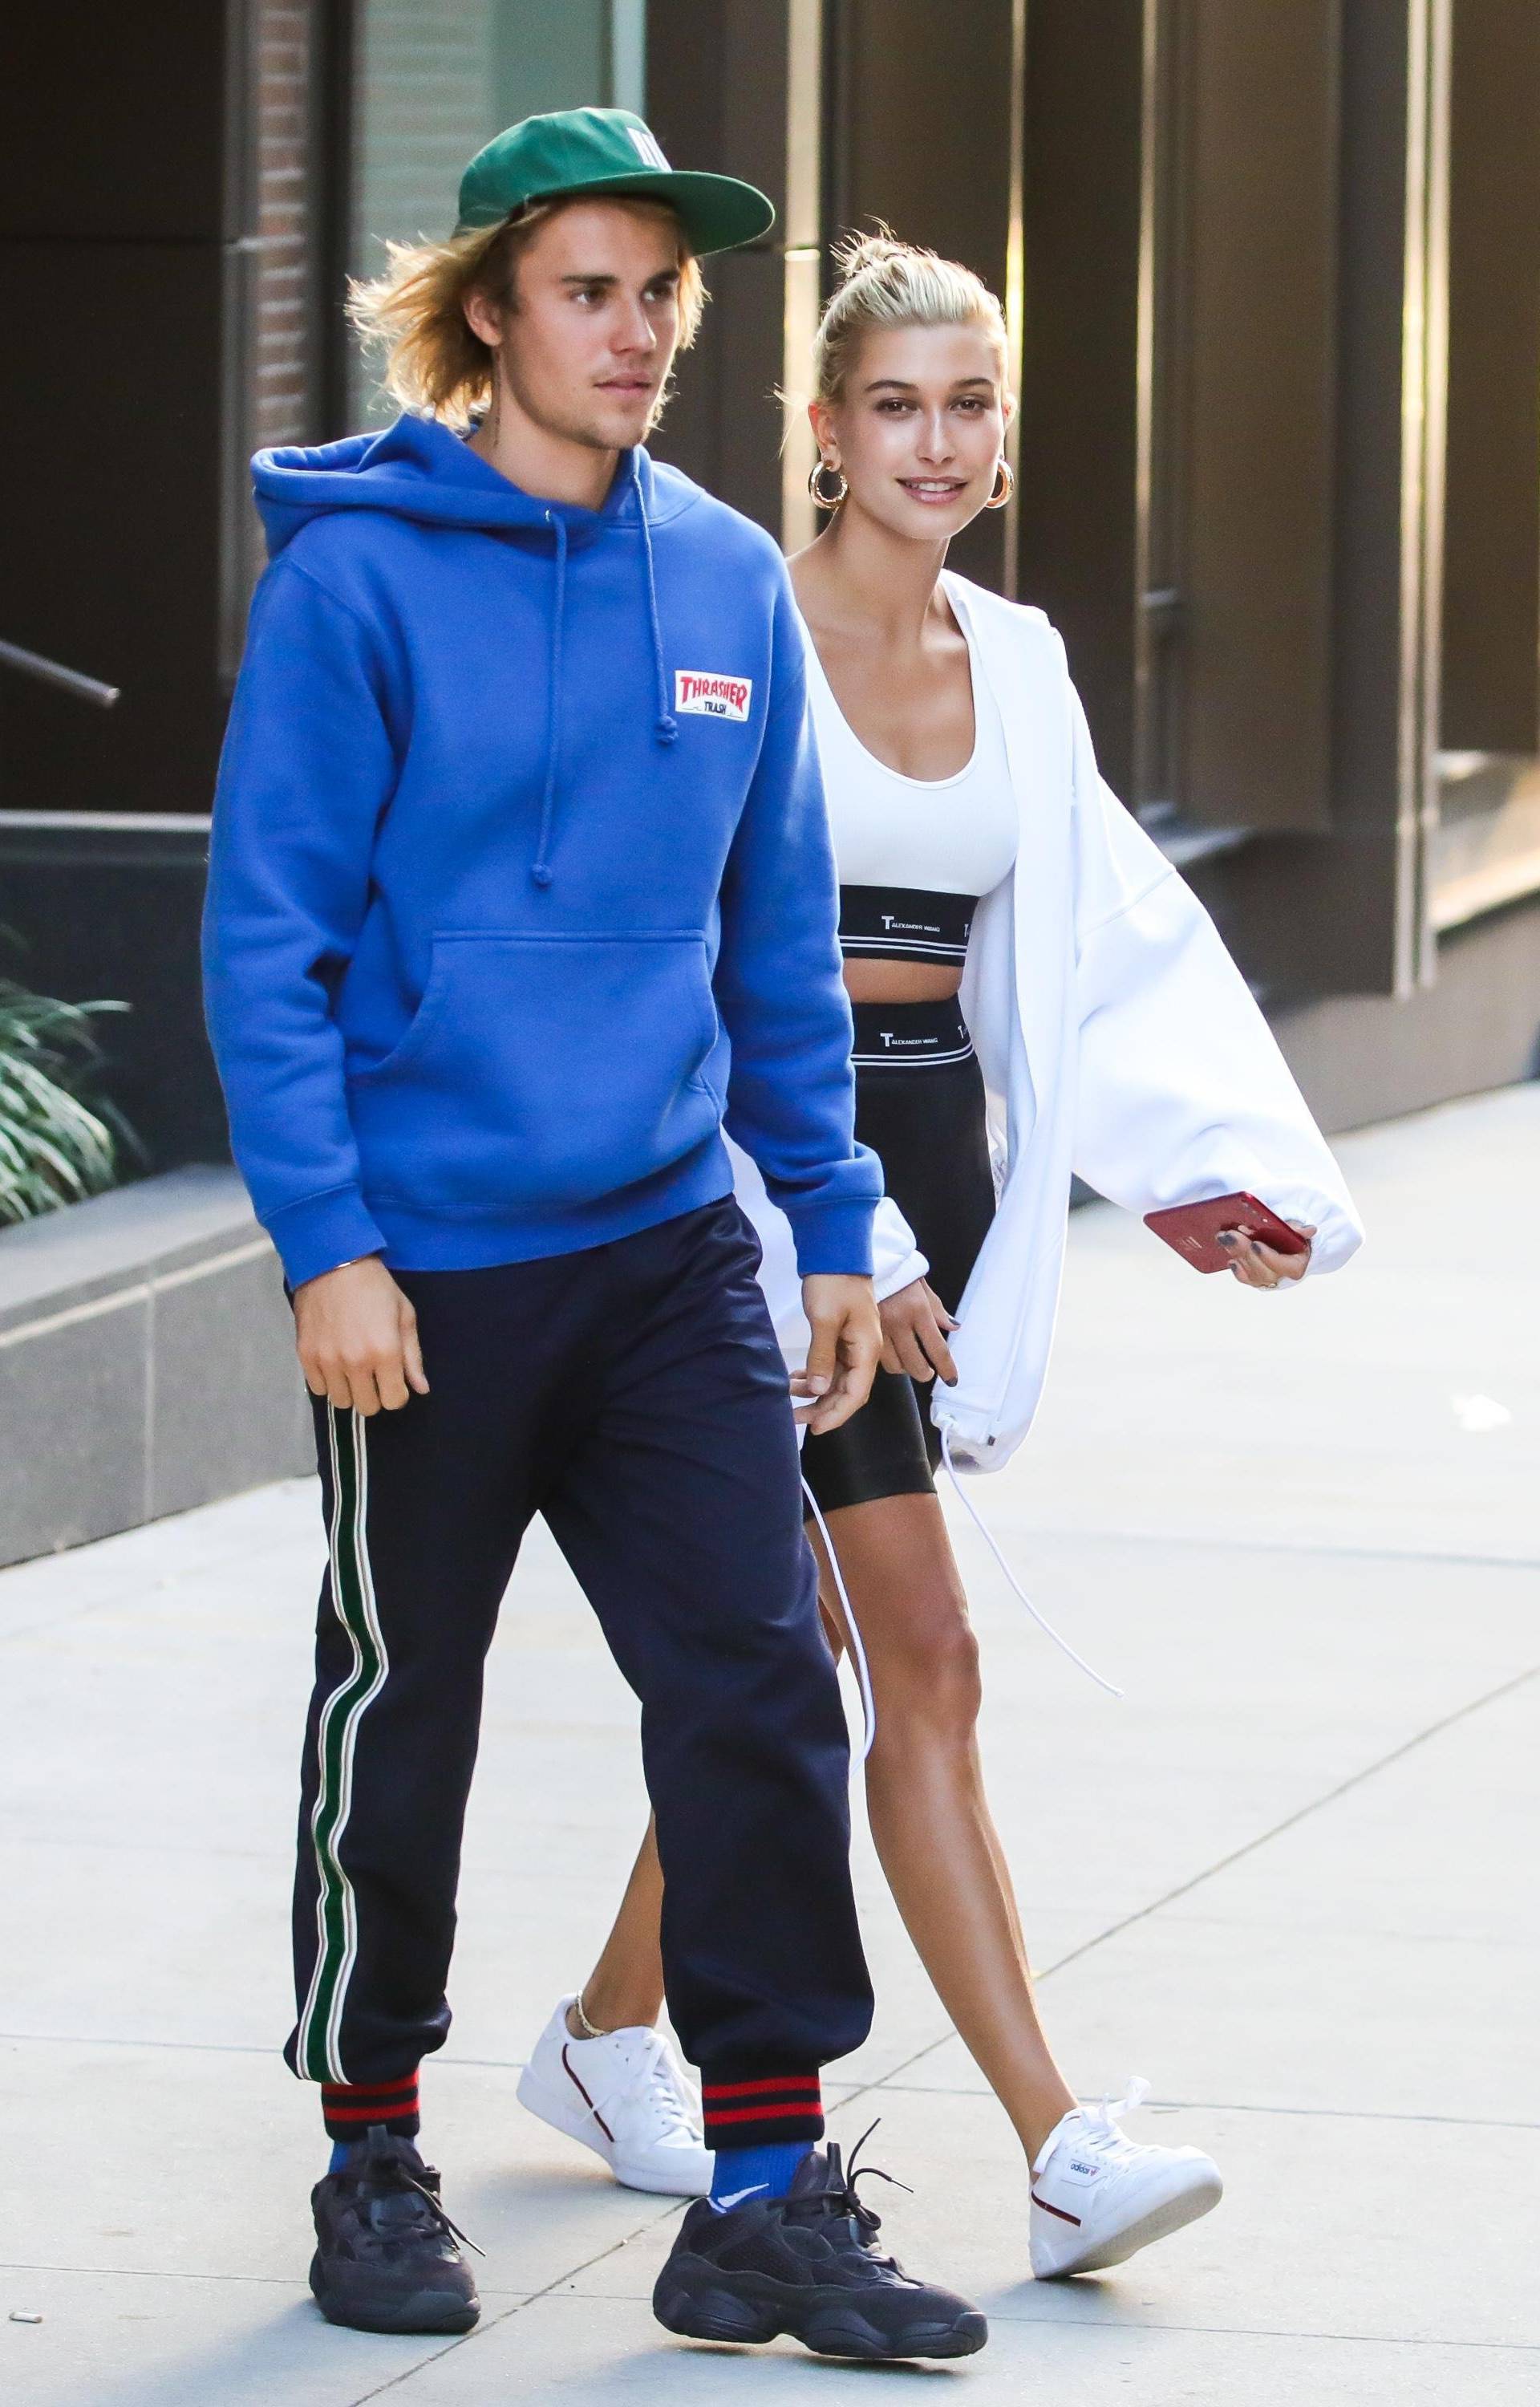 Justin Bieber And Hailey Baldwin Spotted Together in New York City